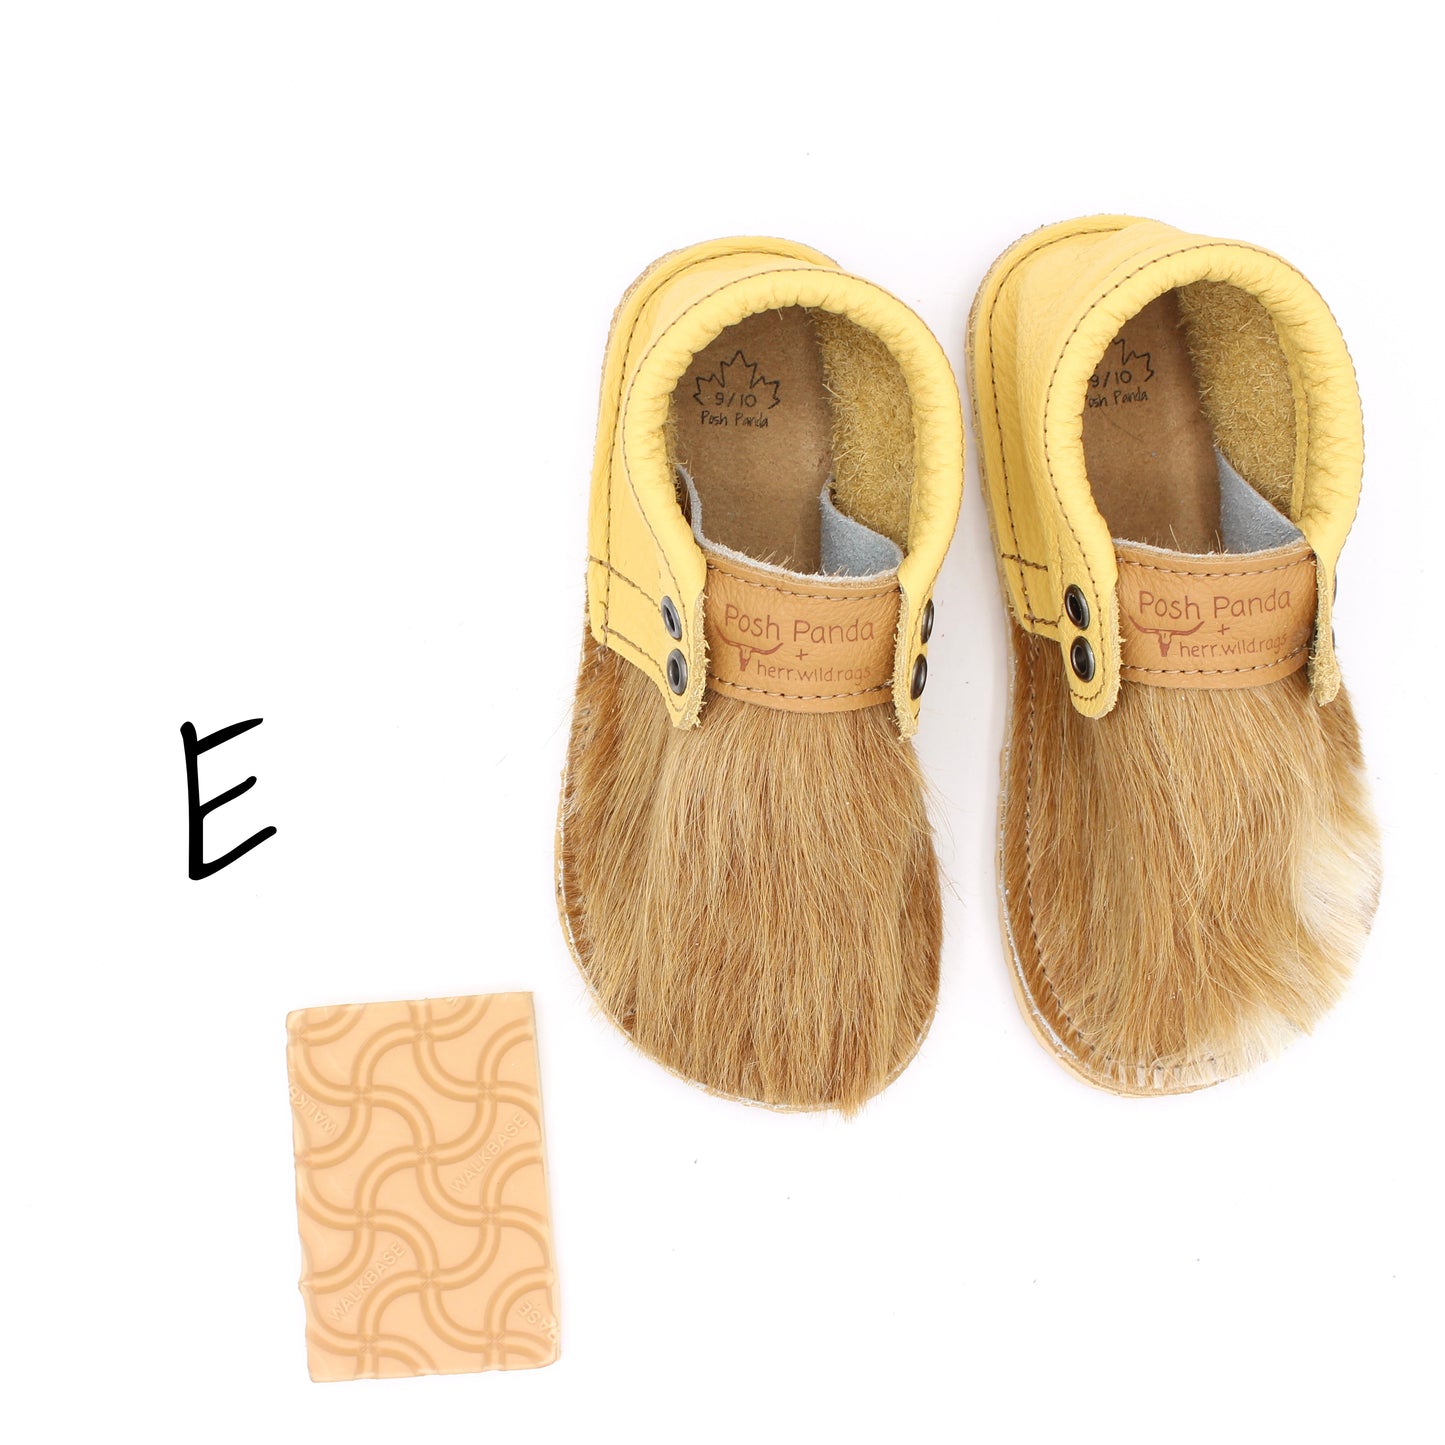 Hair Hide Mocs -  TODDLER - Size 9/10 (RUGGED Sole)